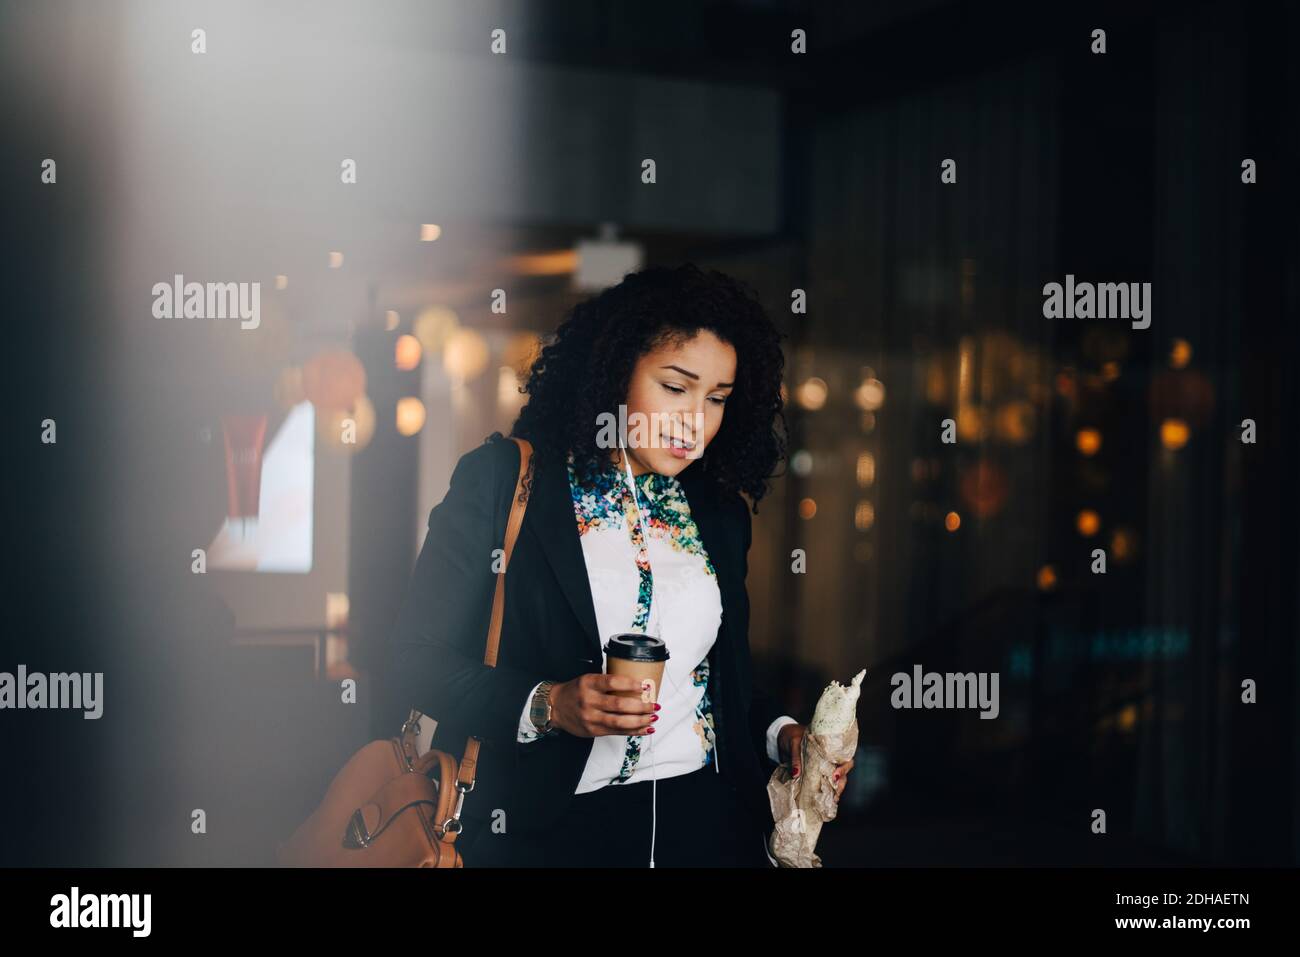 Mid adult businesswoman holding food and drink while walking in cafe Stock Photo